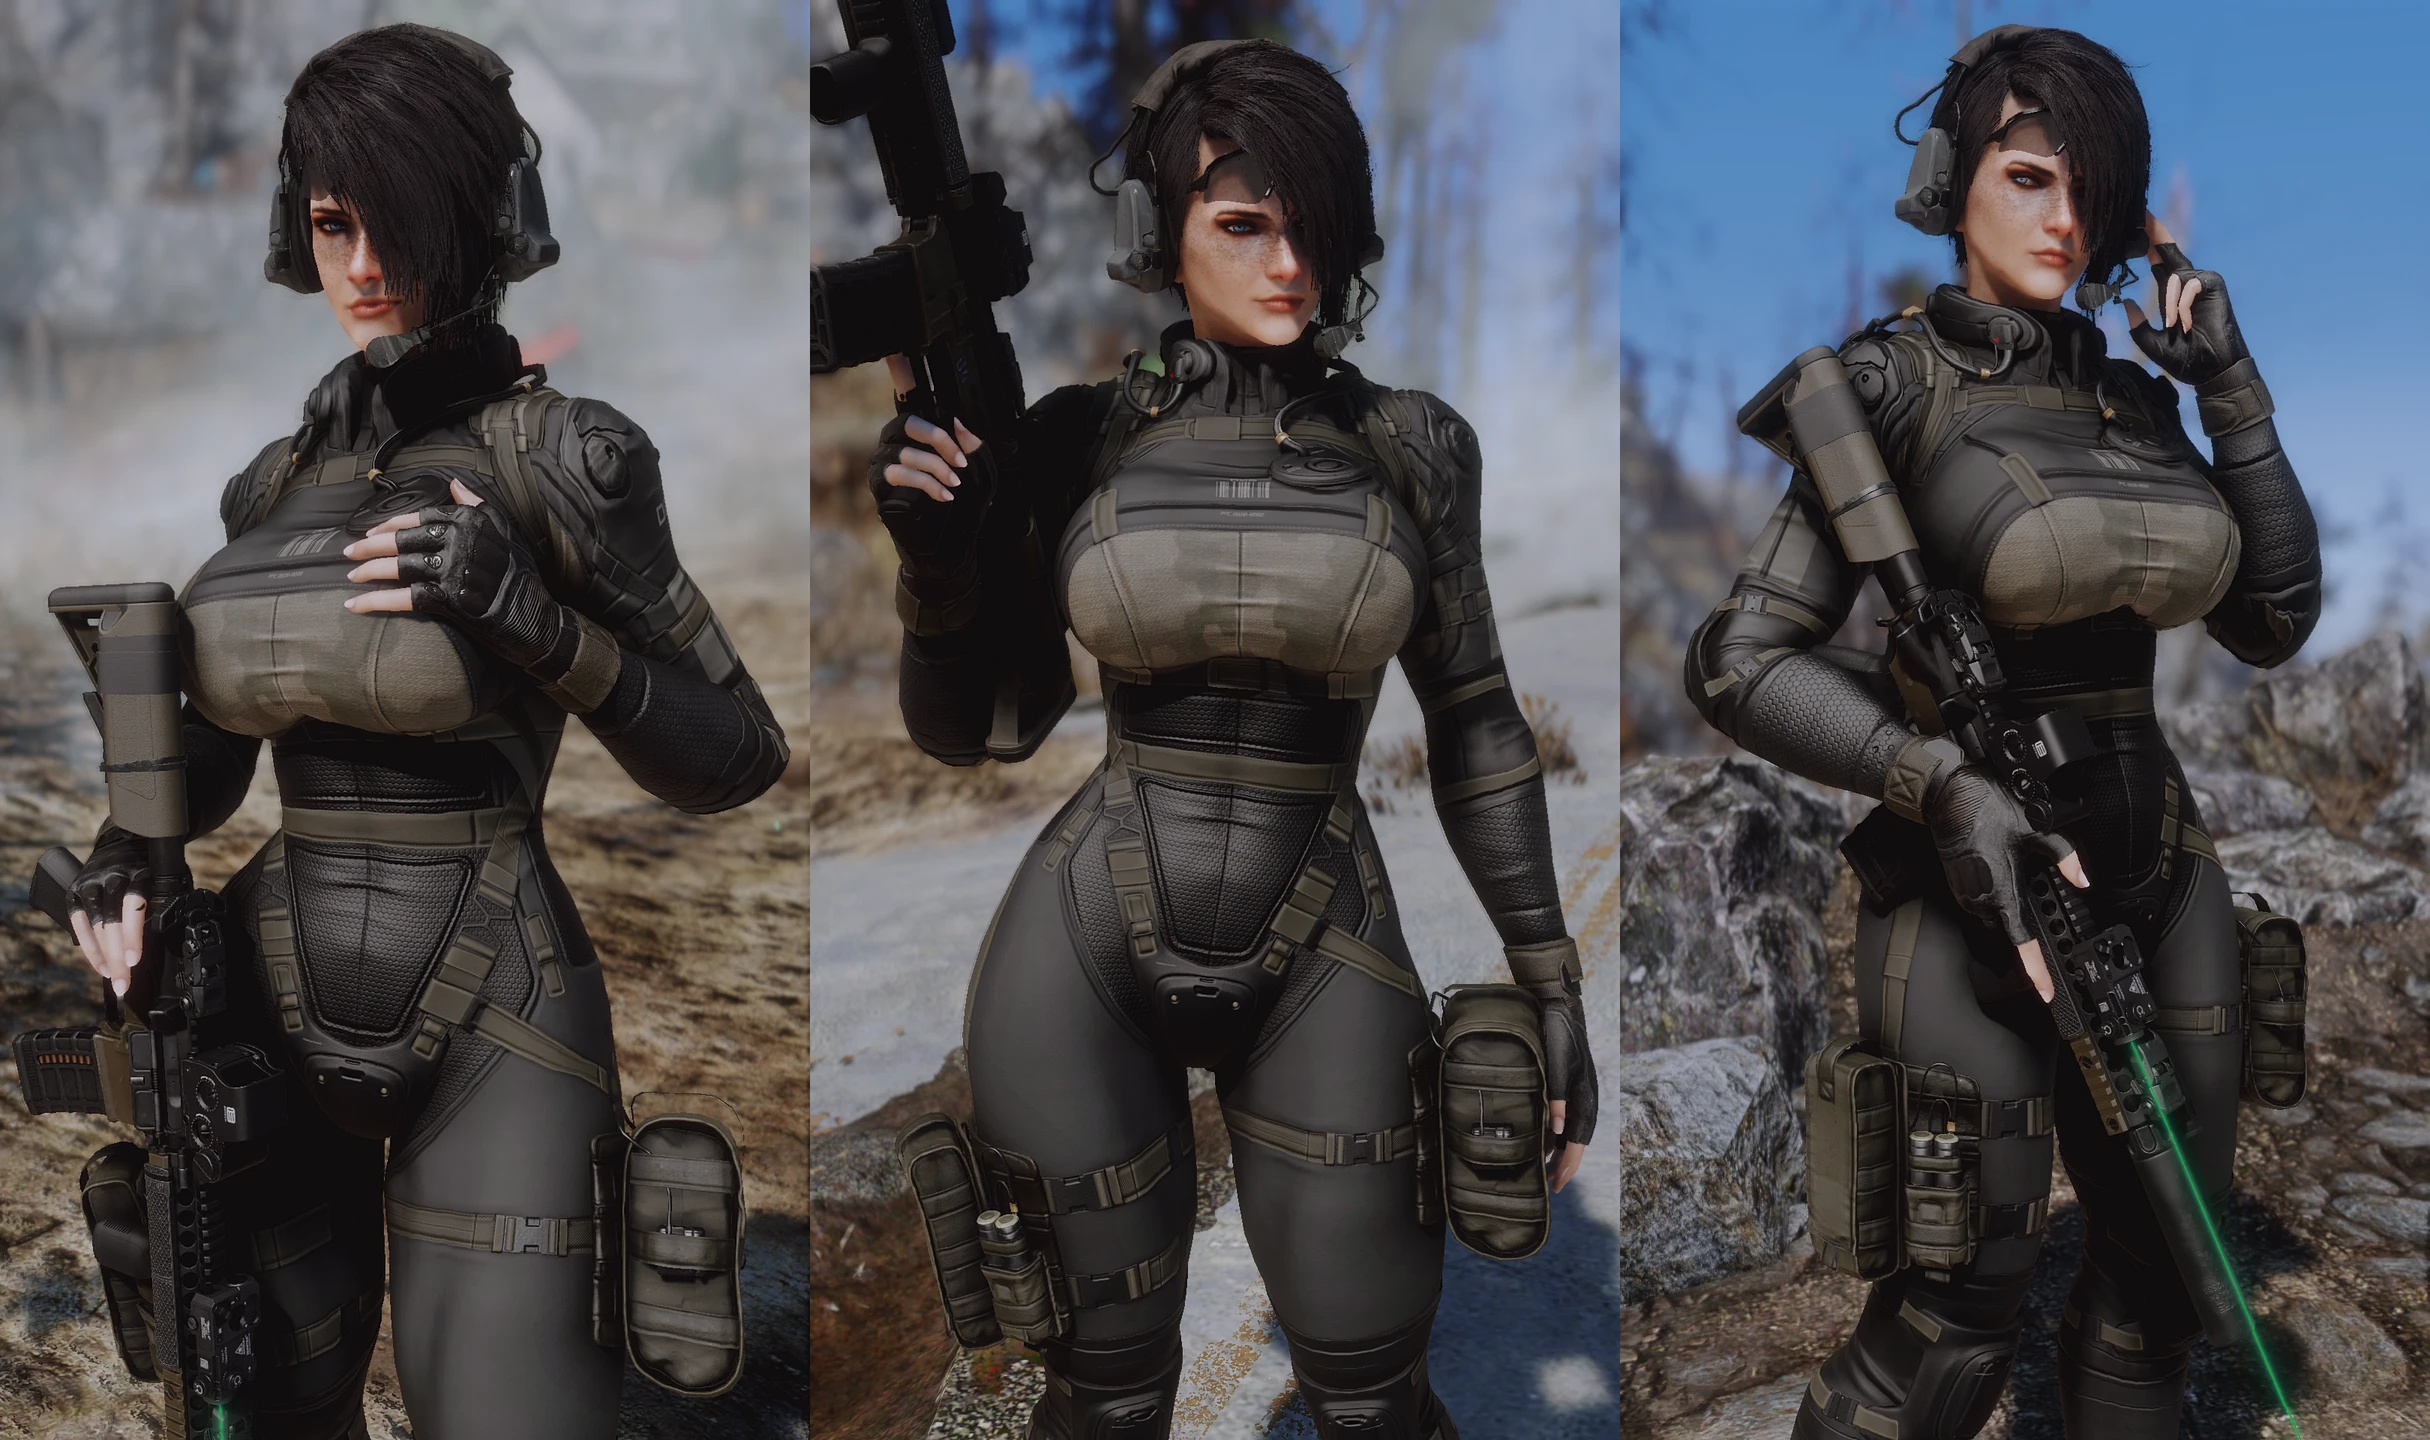 Mod categories at Fallout 4 Nexus - Mods and community